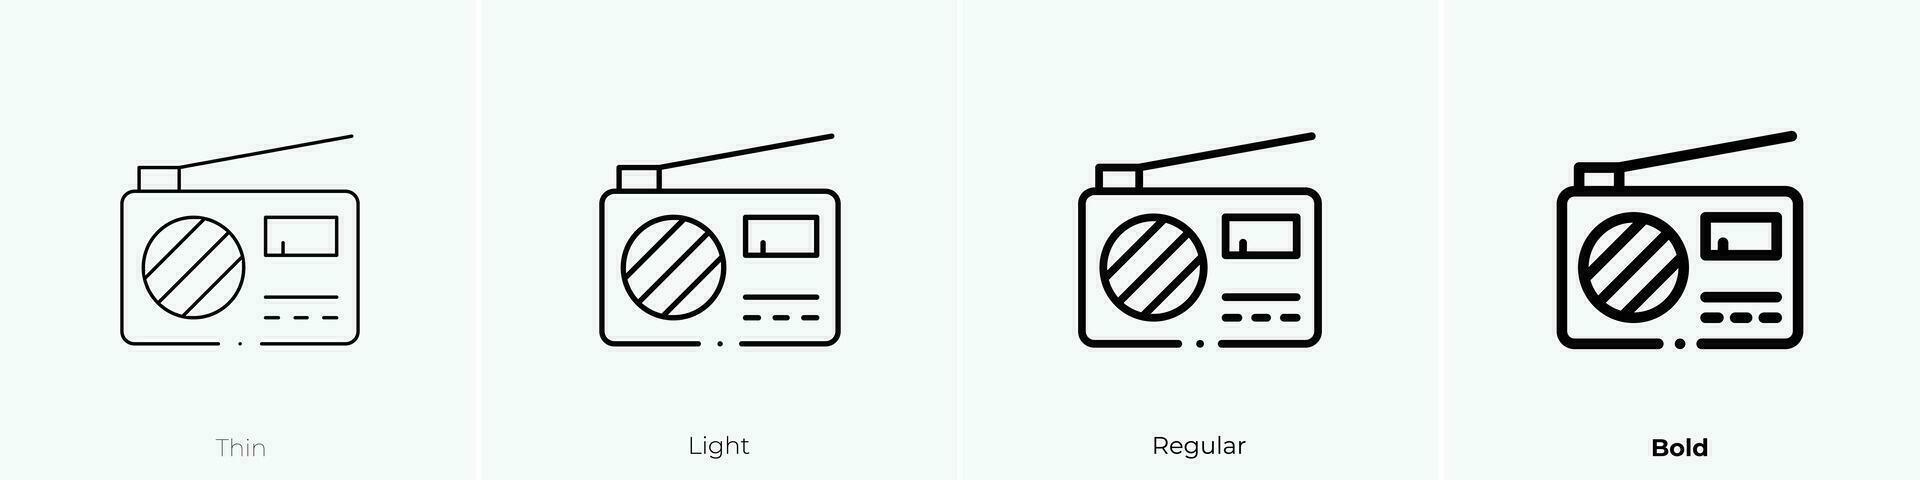 radio icon. Thin, Light, Regular And Bold style design isolated on white background vector